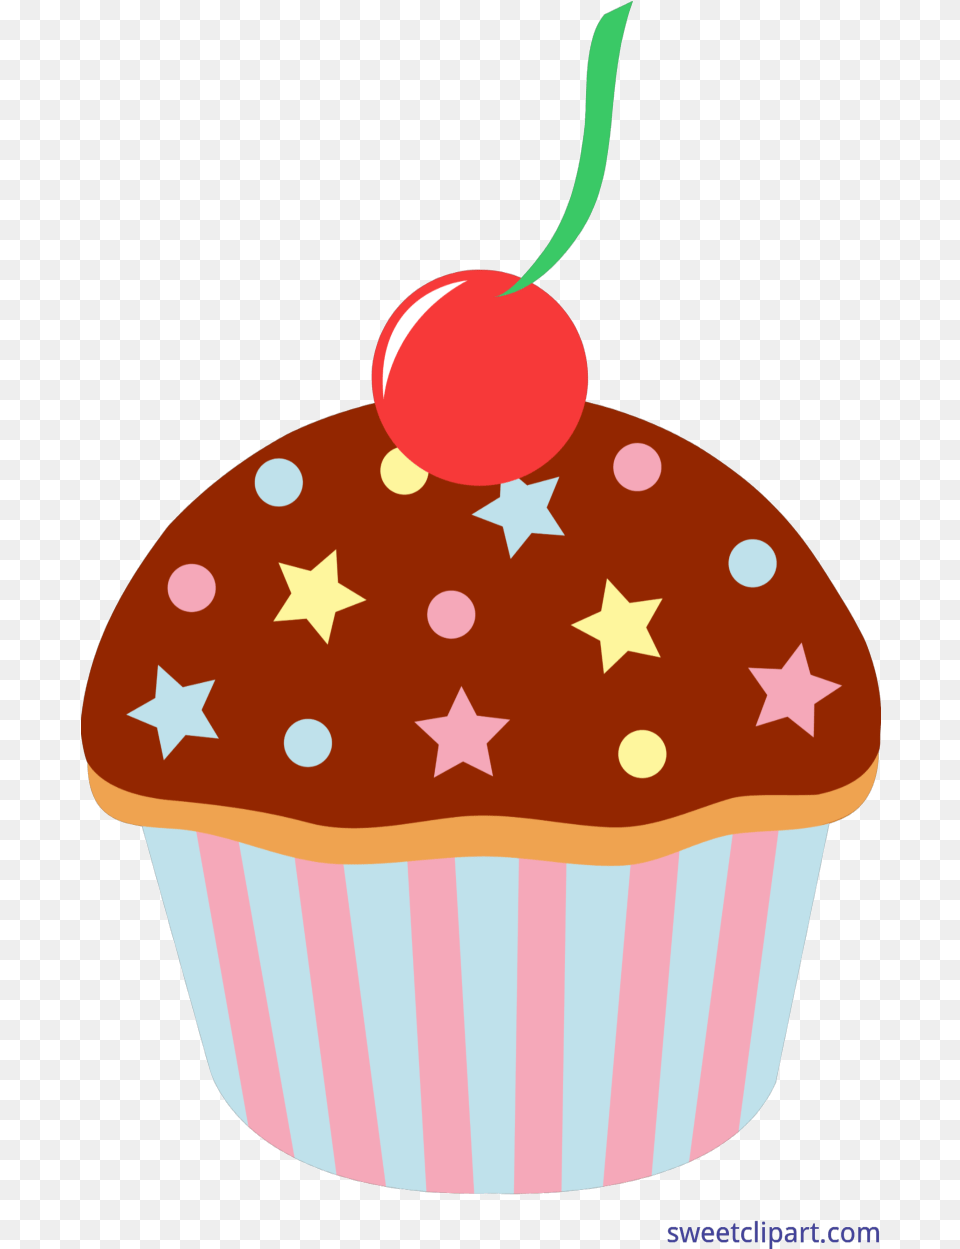 Sprinkles Chocolate With Clip Art Sweet Happy Birthday Cartoon Cakes And Sweets, Cake, Food, Dessert, Cupcake Png Image